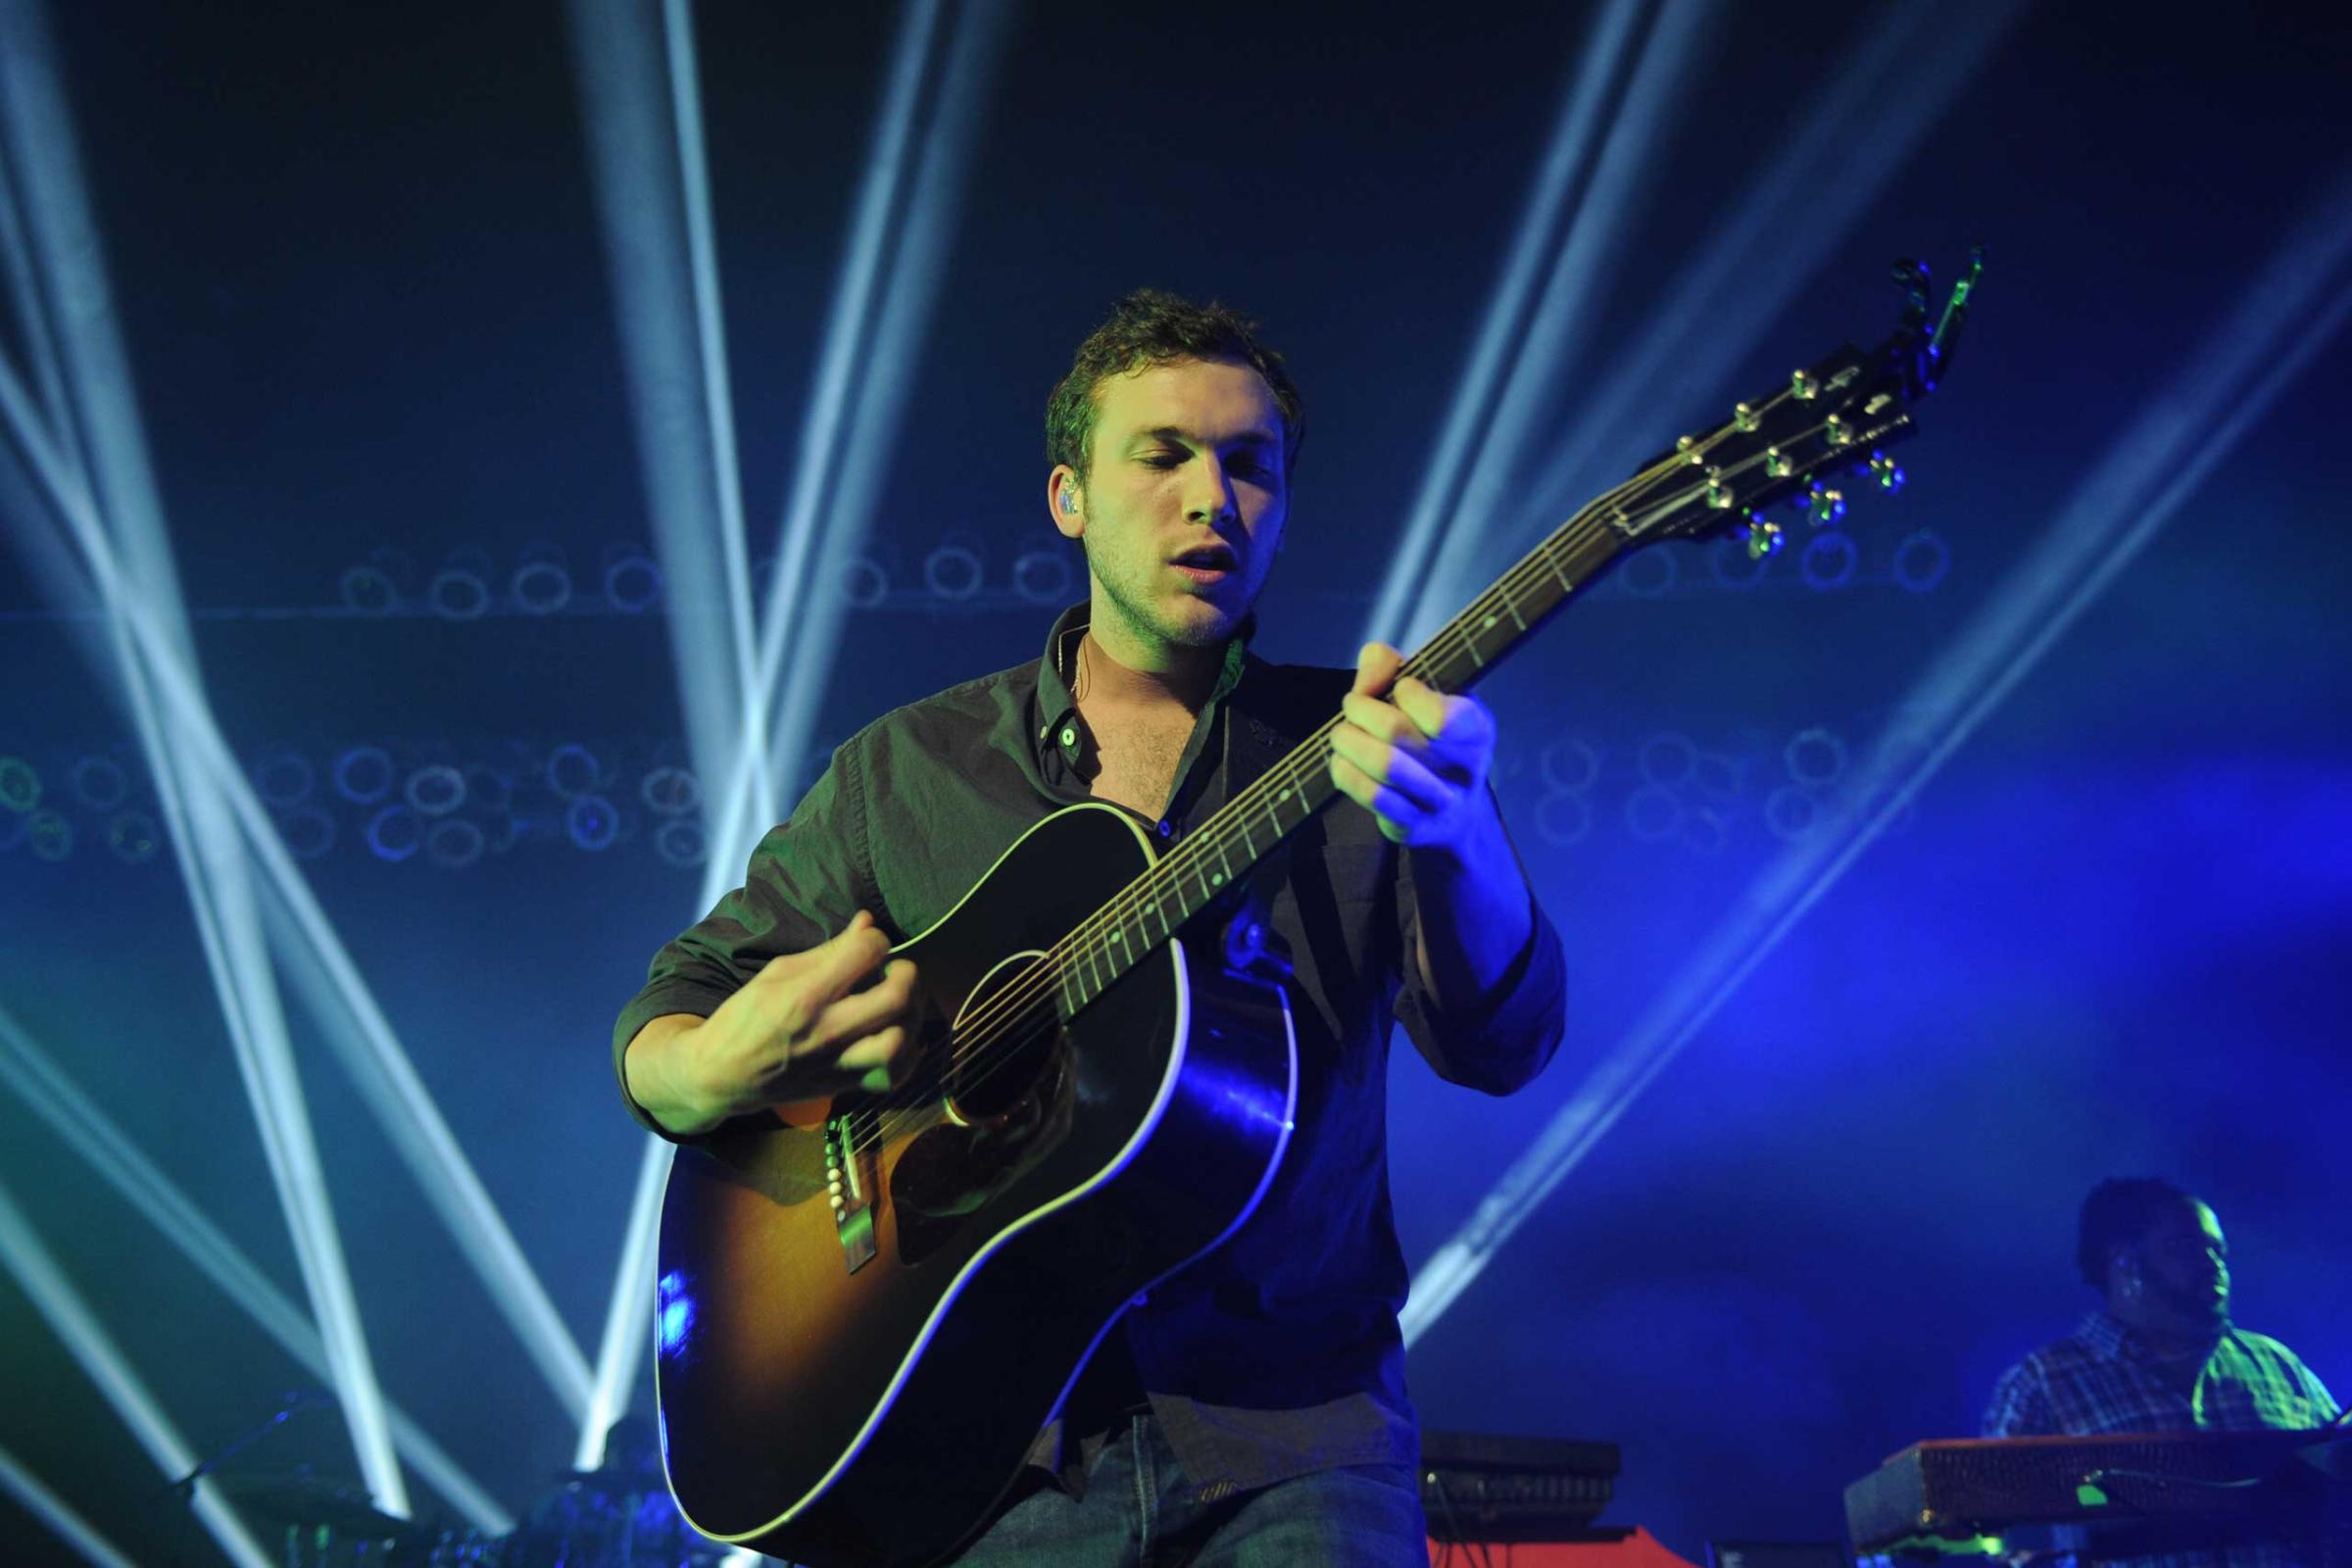 Phillip Phillips performs at Hard Rock Live! in the Seminole Hard Rock Hotel & Casino in Hollywood, Fla. on Nov. 15, 2014.